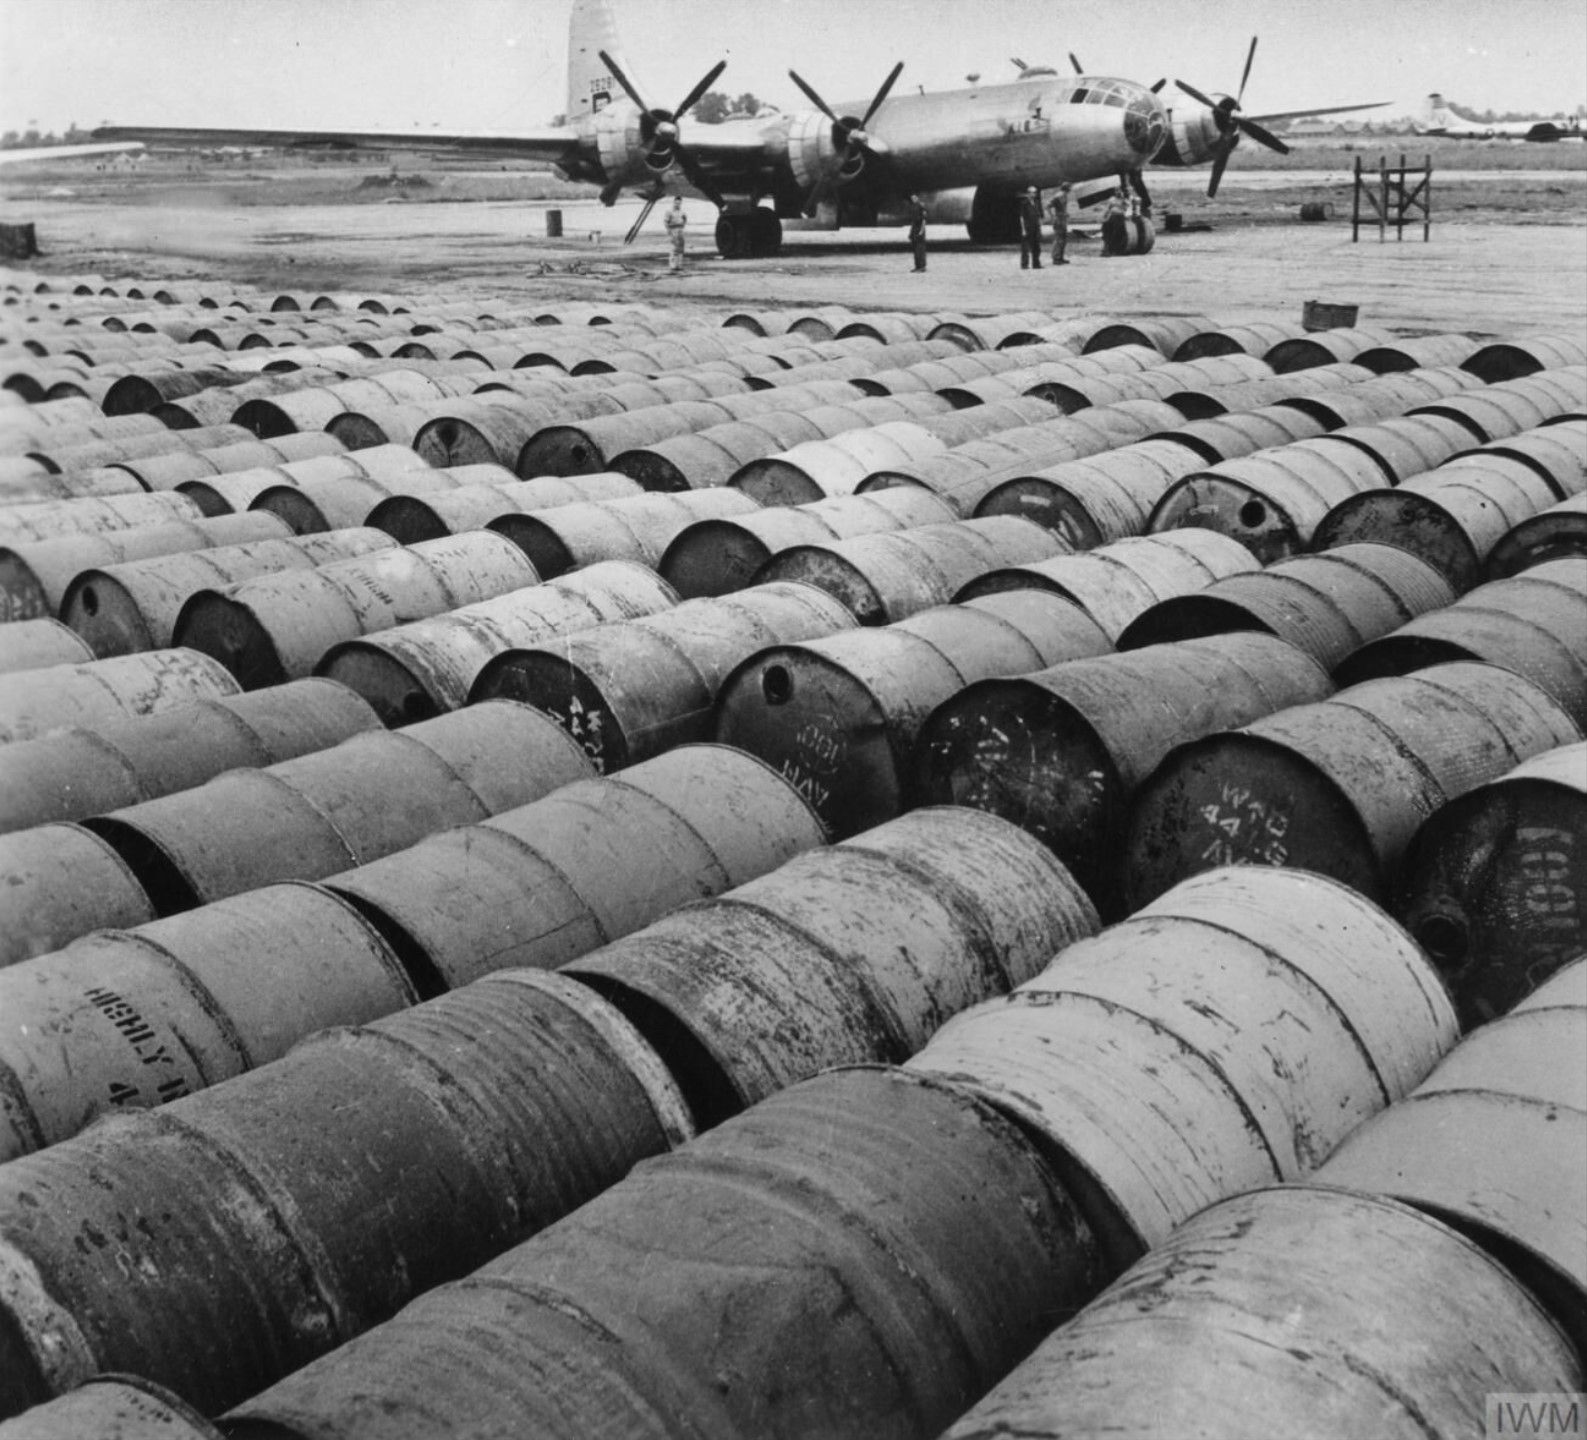 Fuel drums in front of a B-29 in China